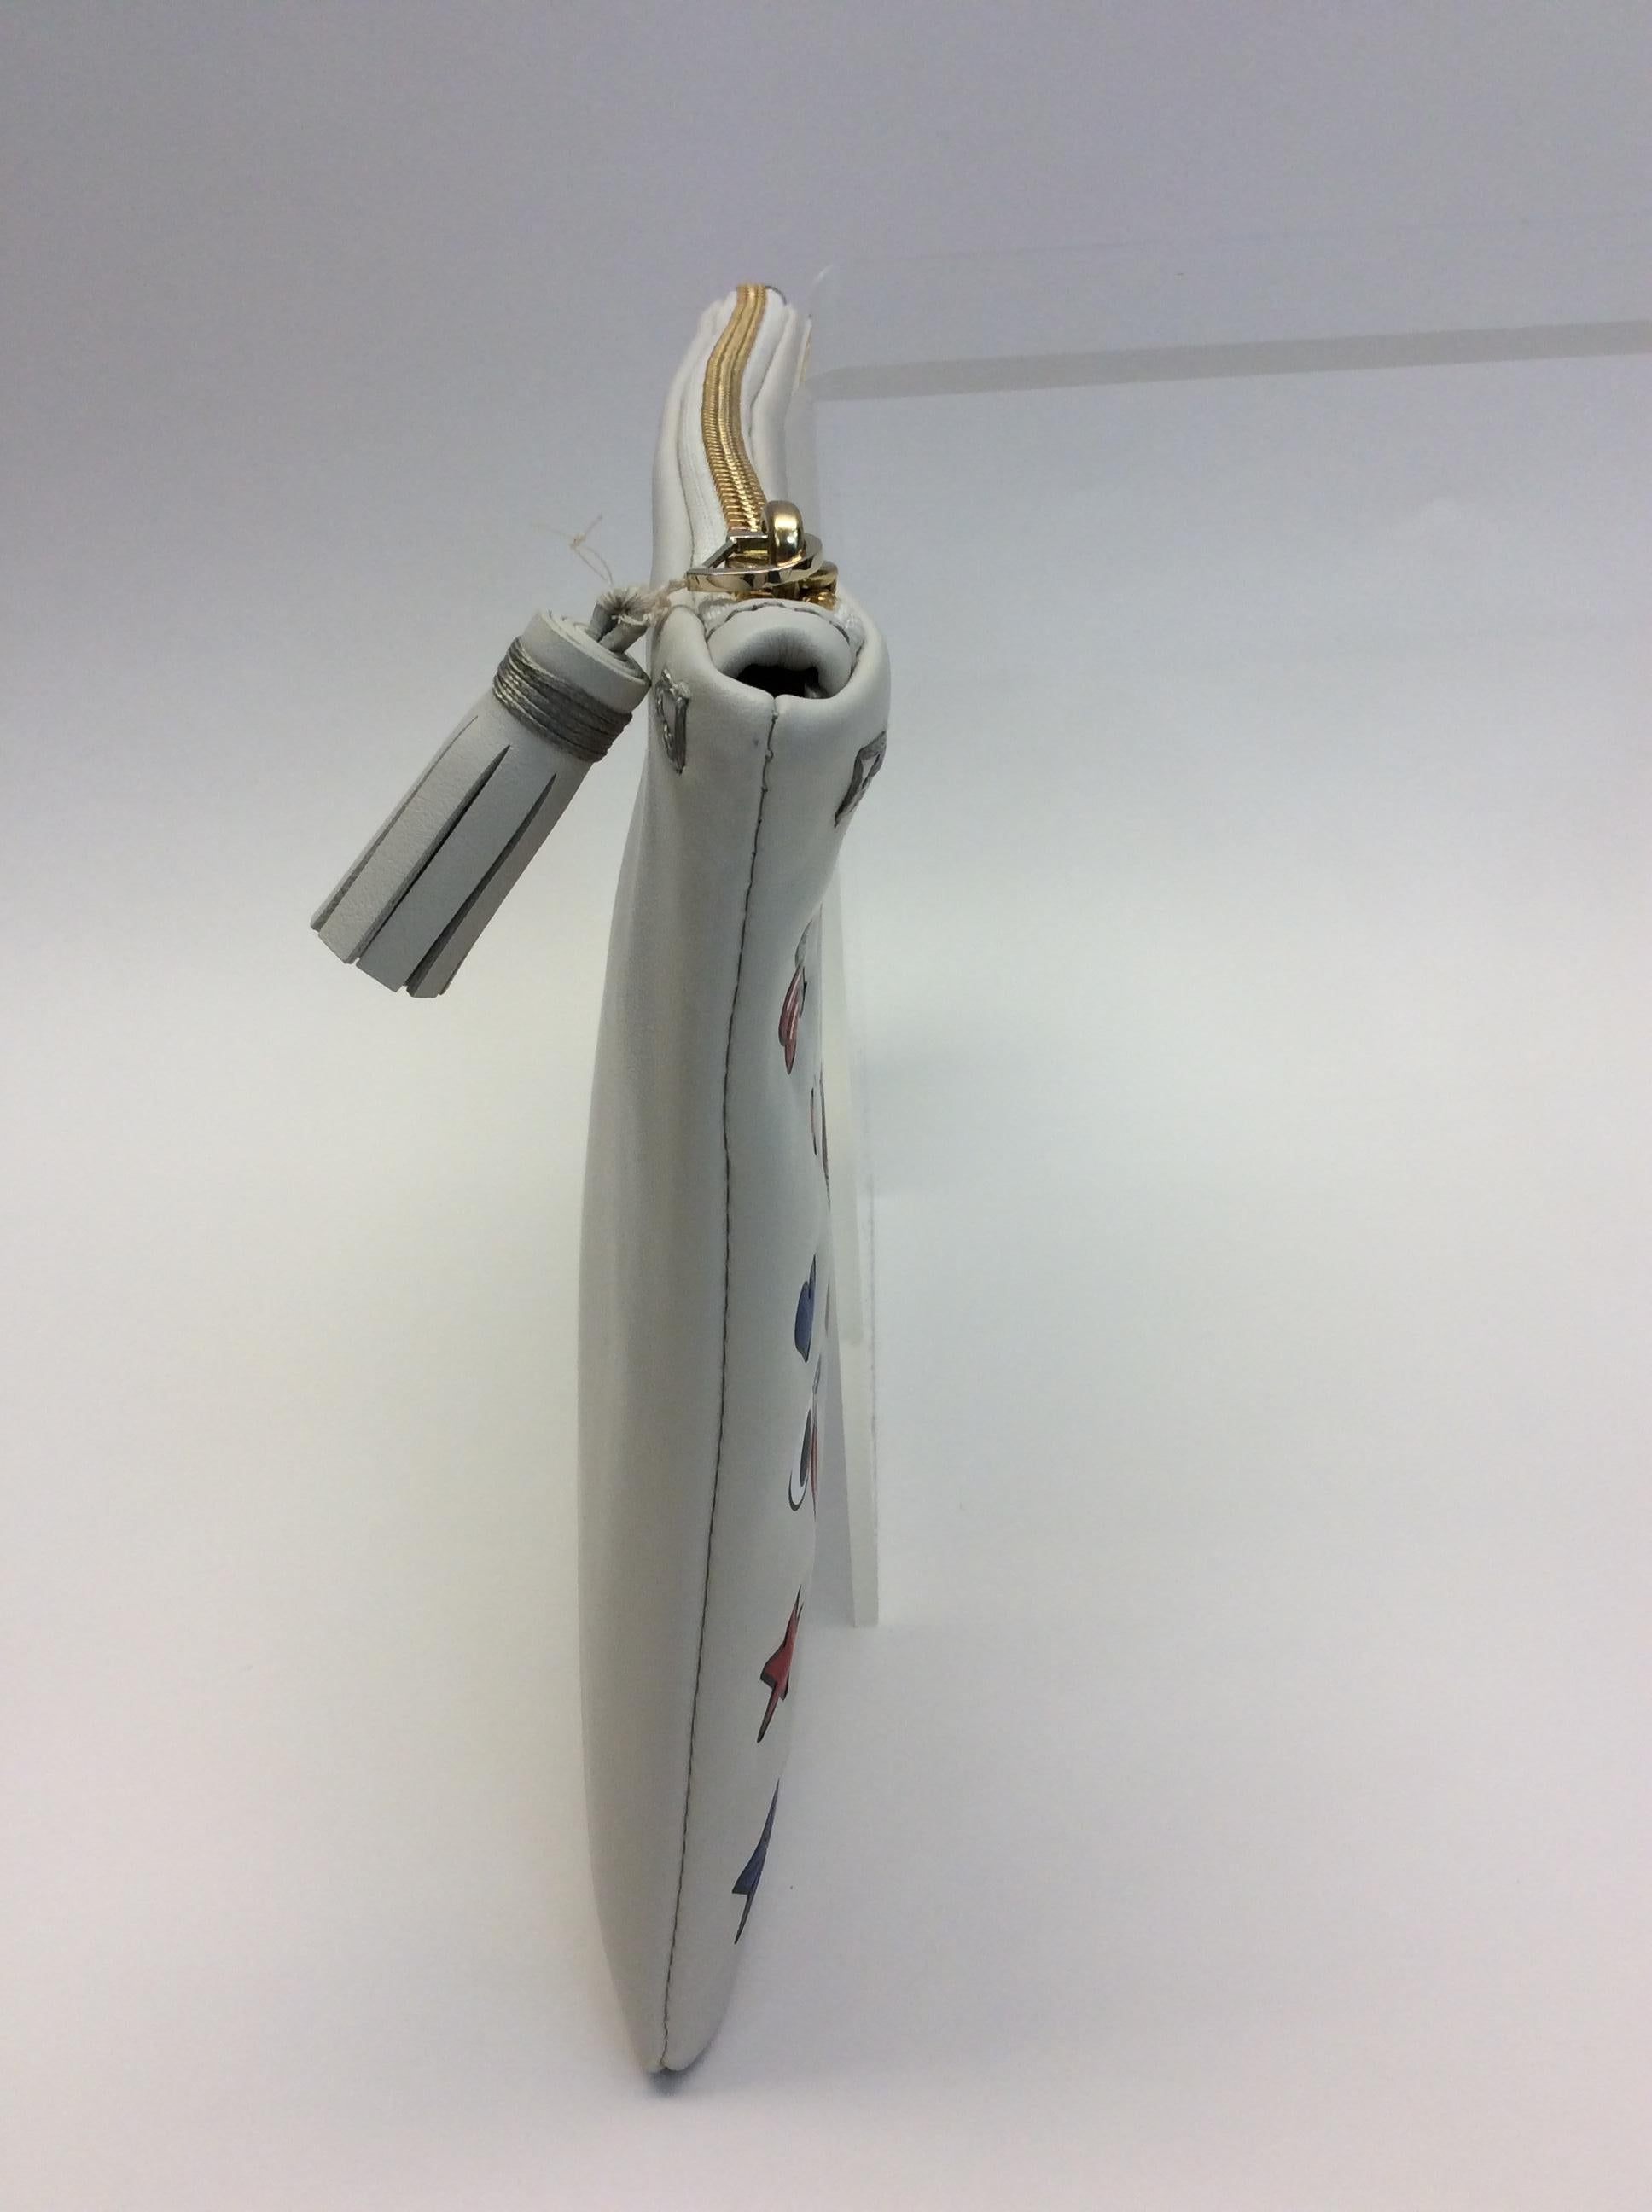 Anya Hindmarch White Leather Sticker Clutch In Excellent Condition For Sale In Narberth, PA